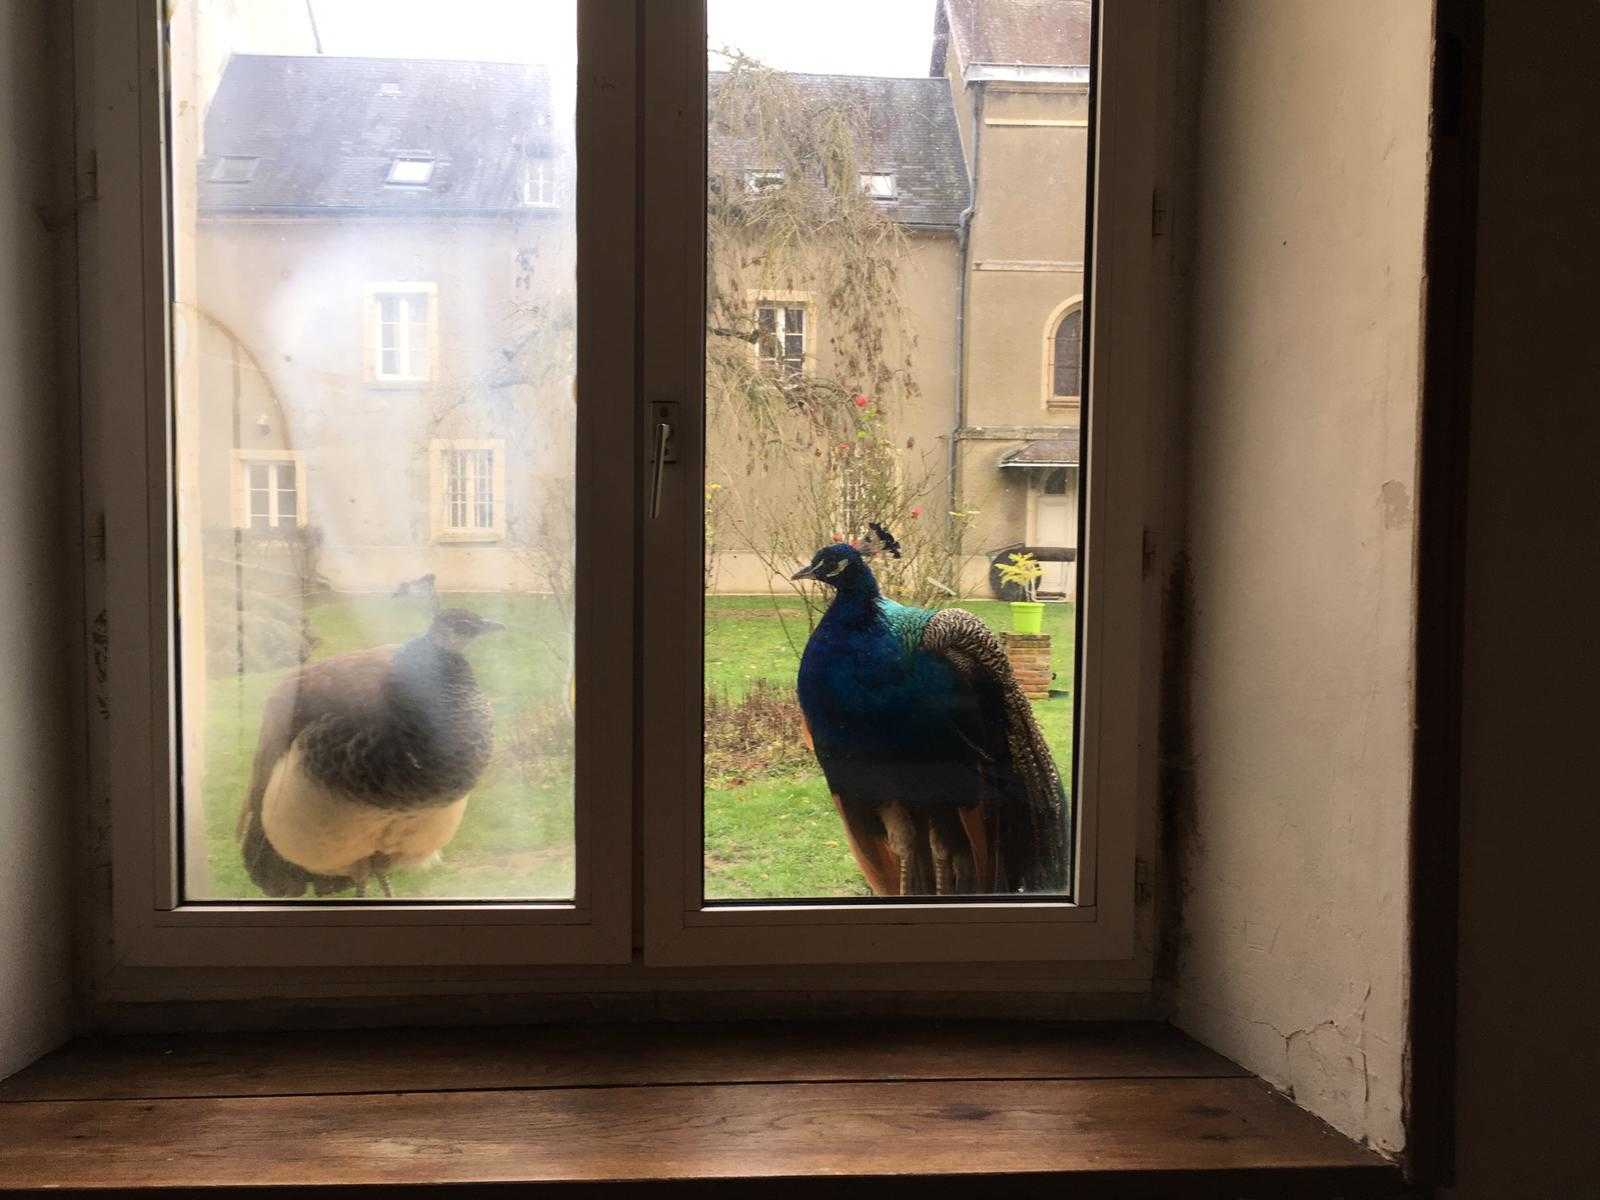 PAF Peacocks want to come in from the cold. December, 2018. Image credit: Jacq van der Spek 